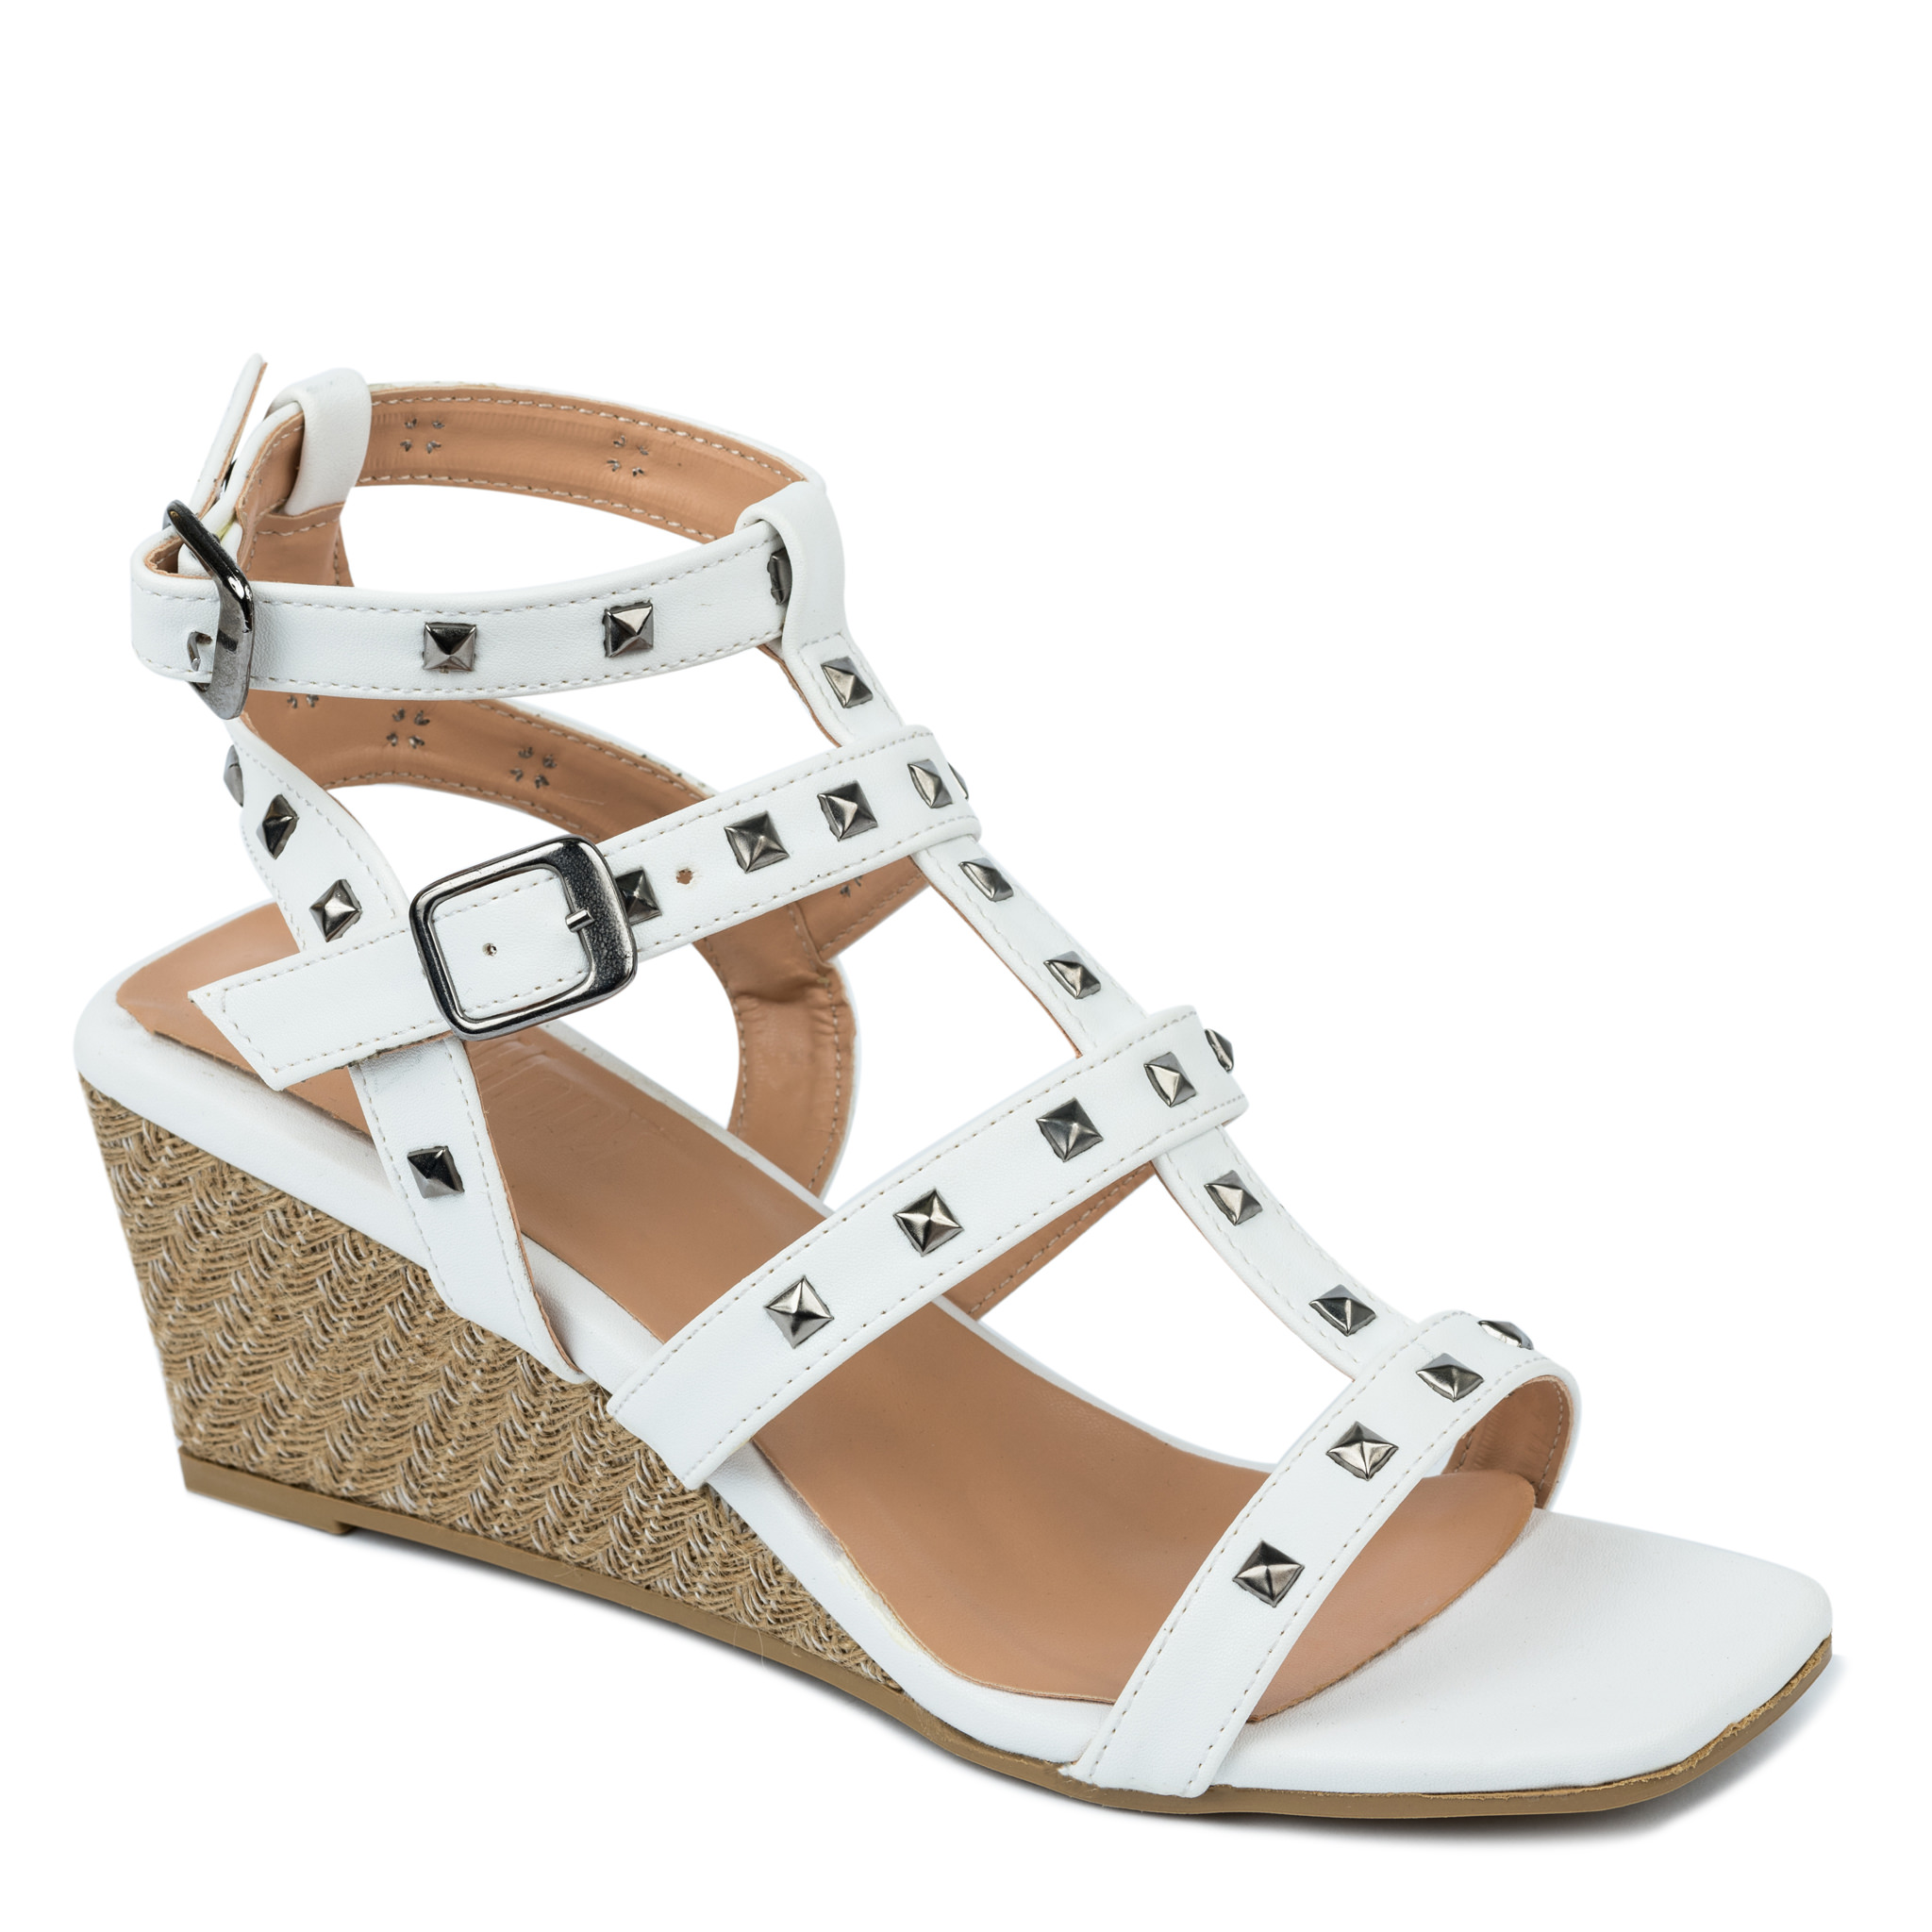 WEDGE SANDALS WITH RIVETS - WHITE